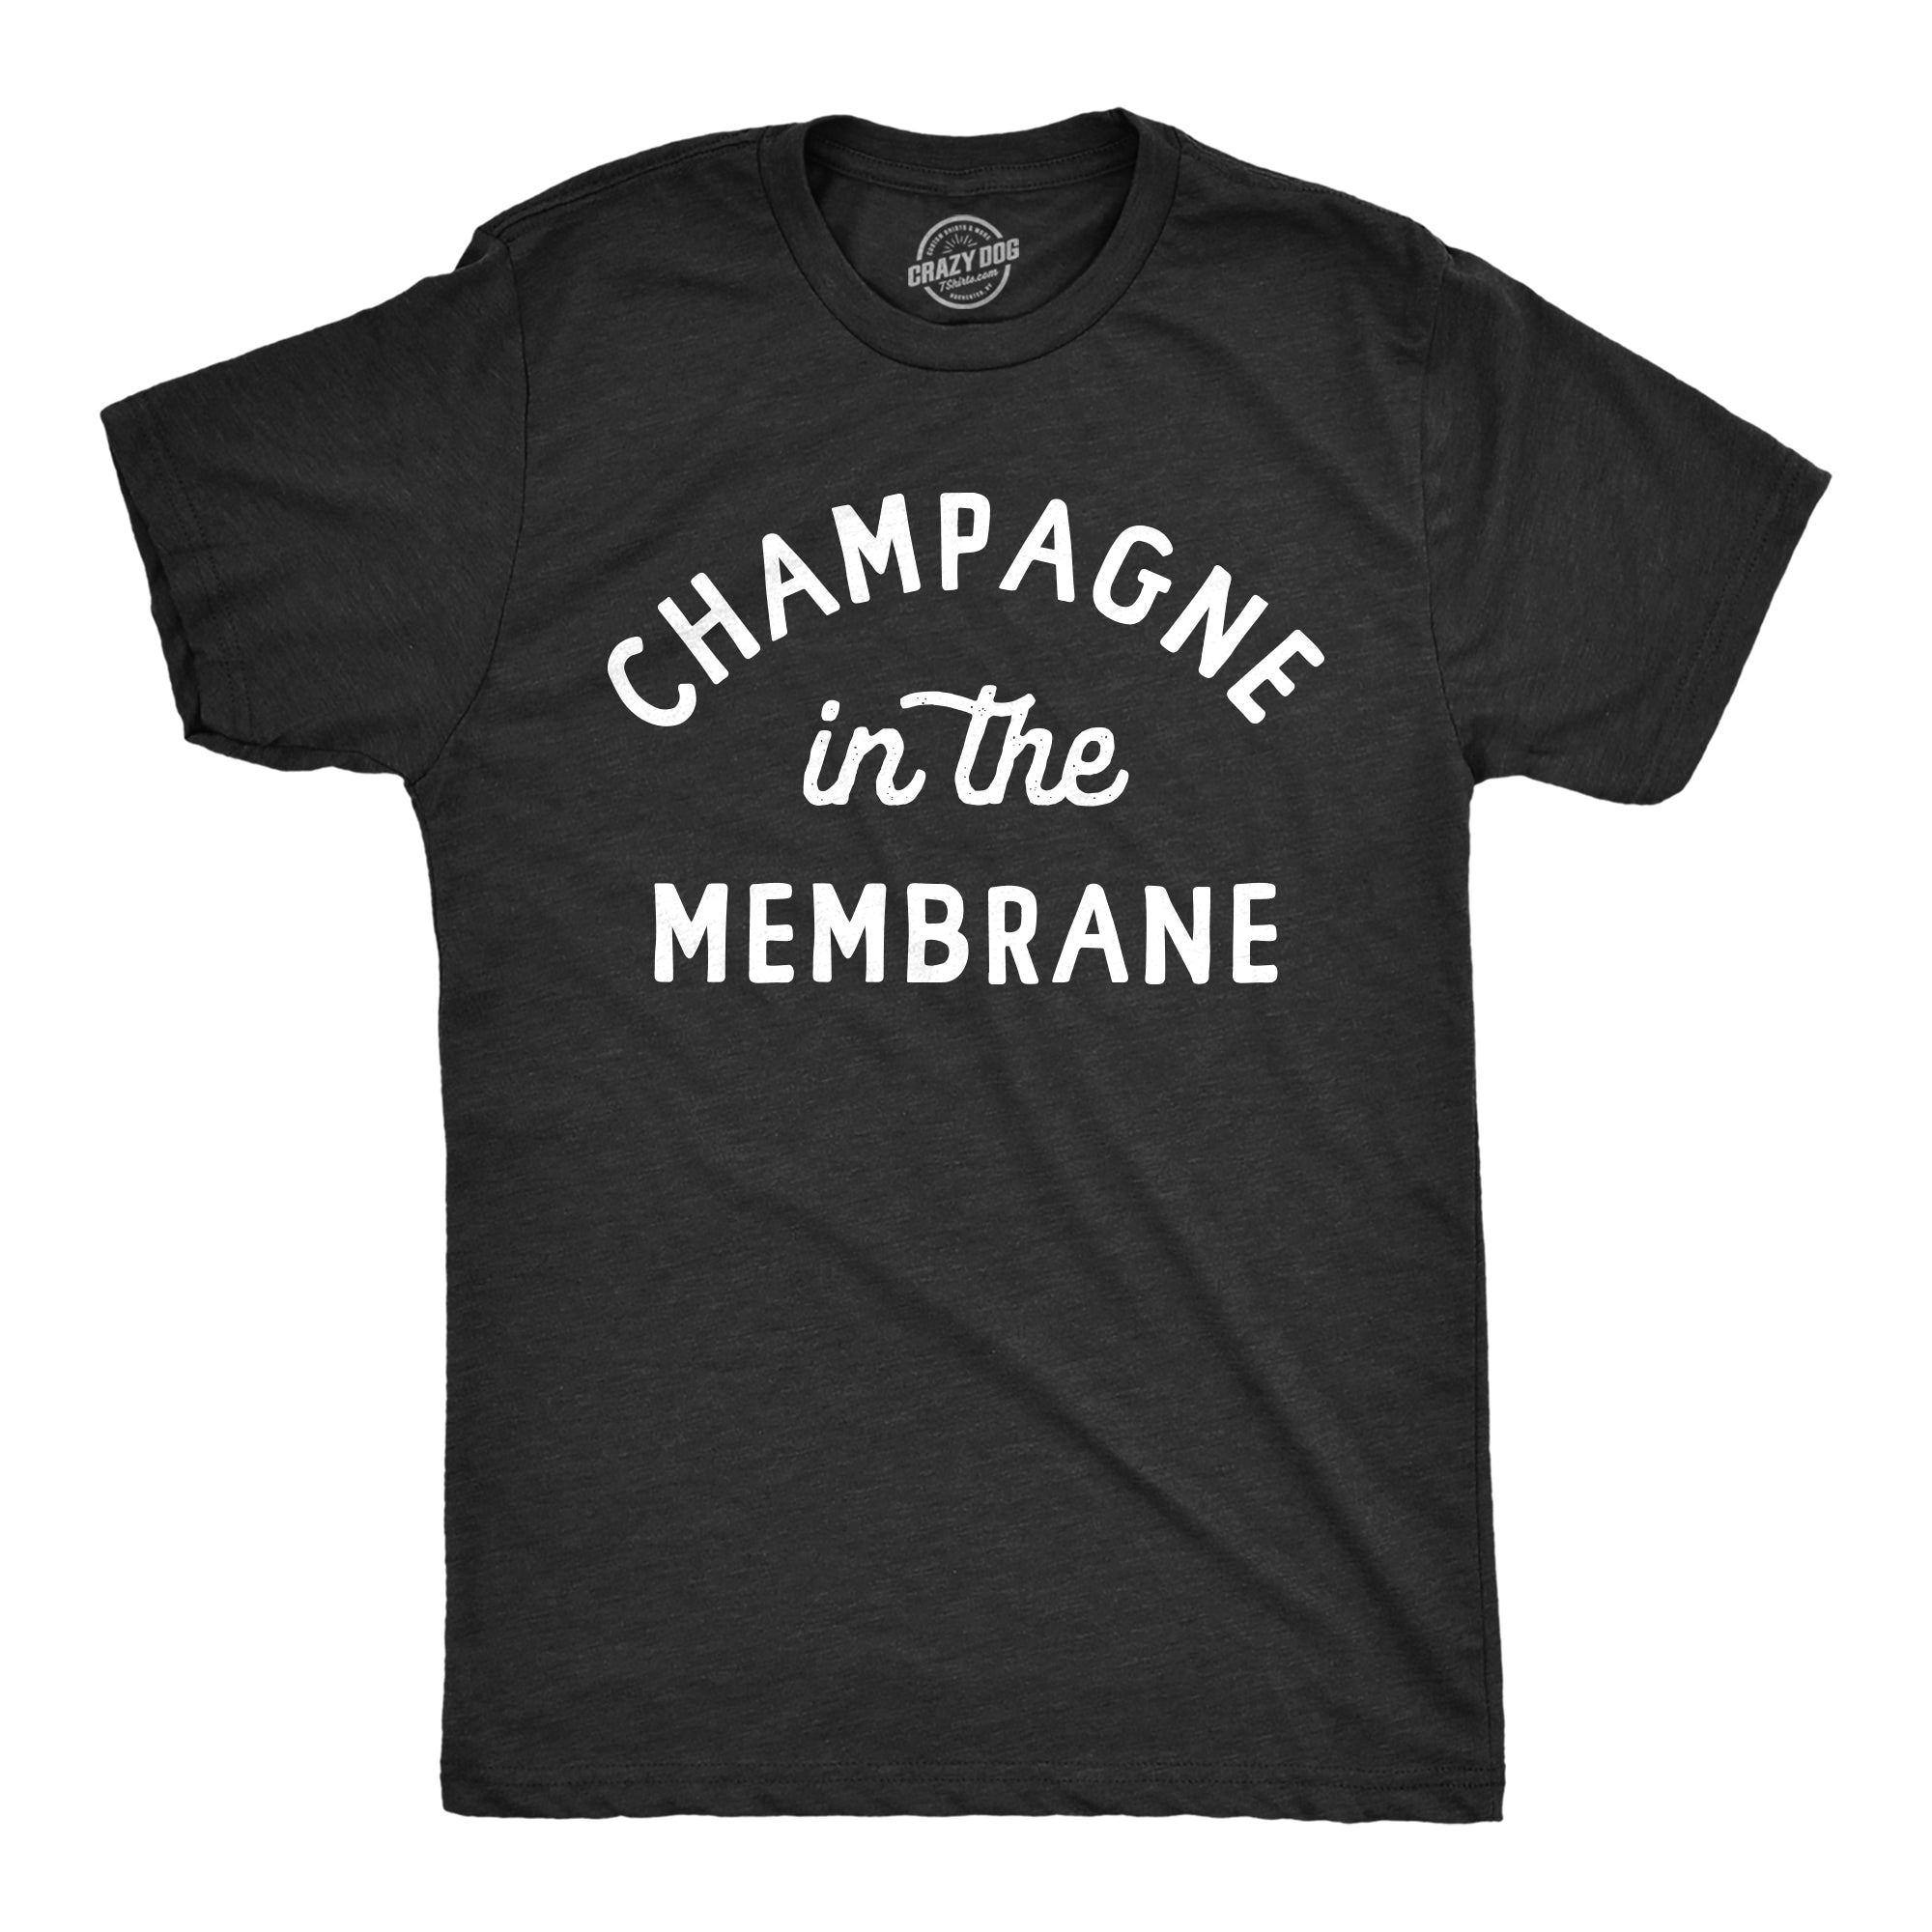 Funny Heather Black - CHAMPAGNE Champagne In The Membrane Mens T Shirt Nerdy New Years Drinking Tee